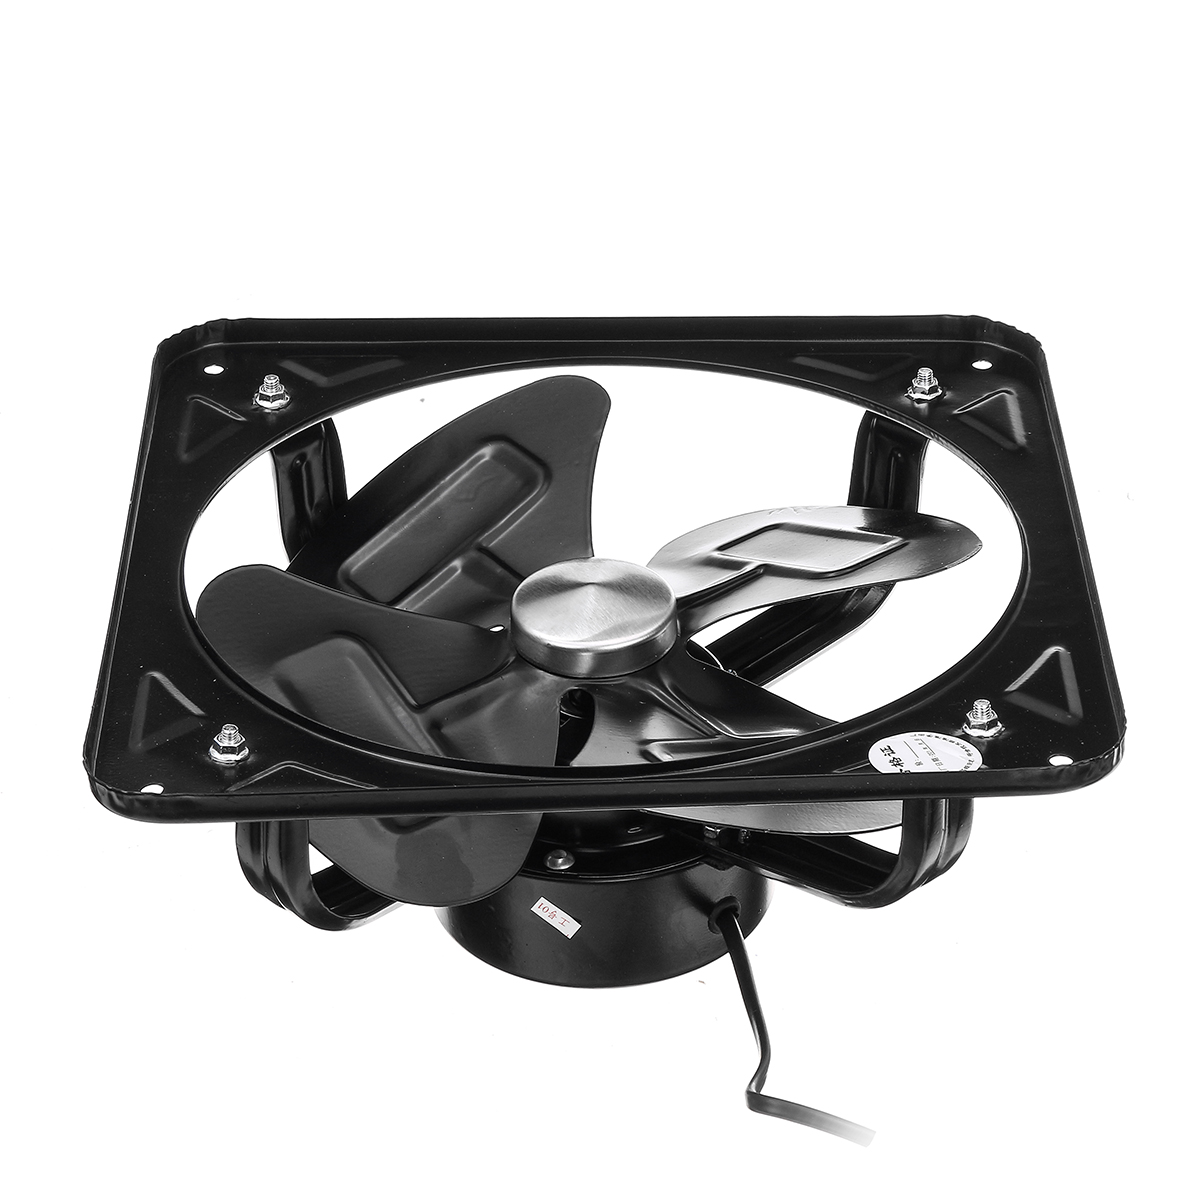 10Inch-220V-40W-Stainless-Steel-Axial-Fan-High-Speed-Quiet-Ventilation-Cooling-Exhaust-Fan-Fume-Extr-1541282-6